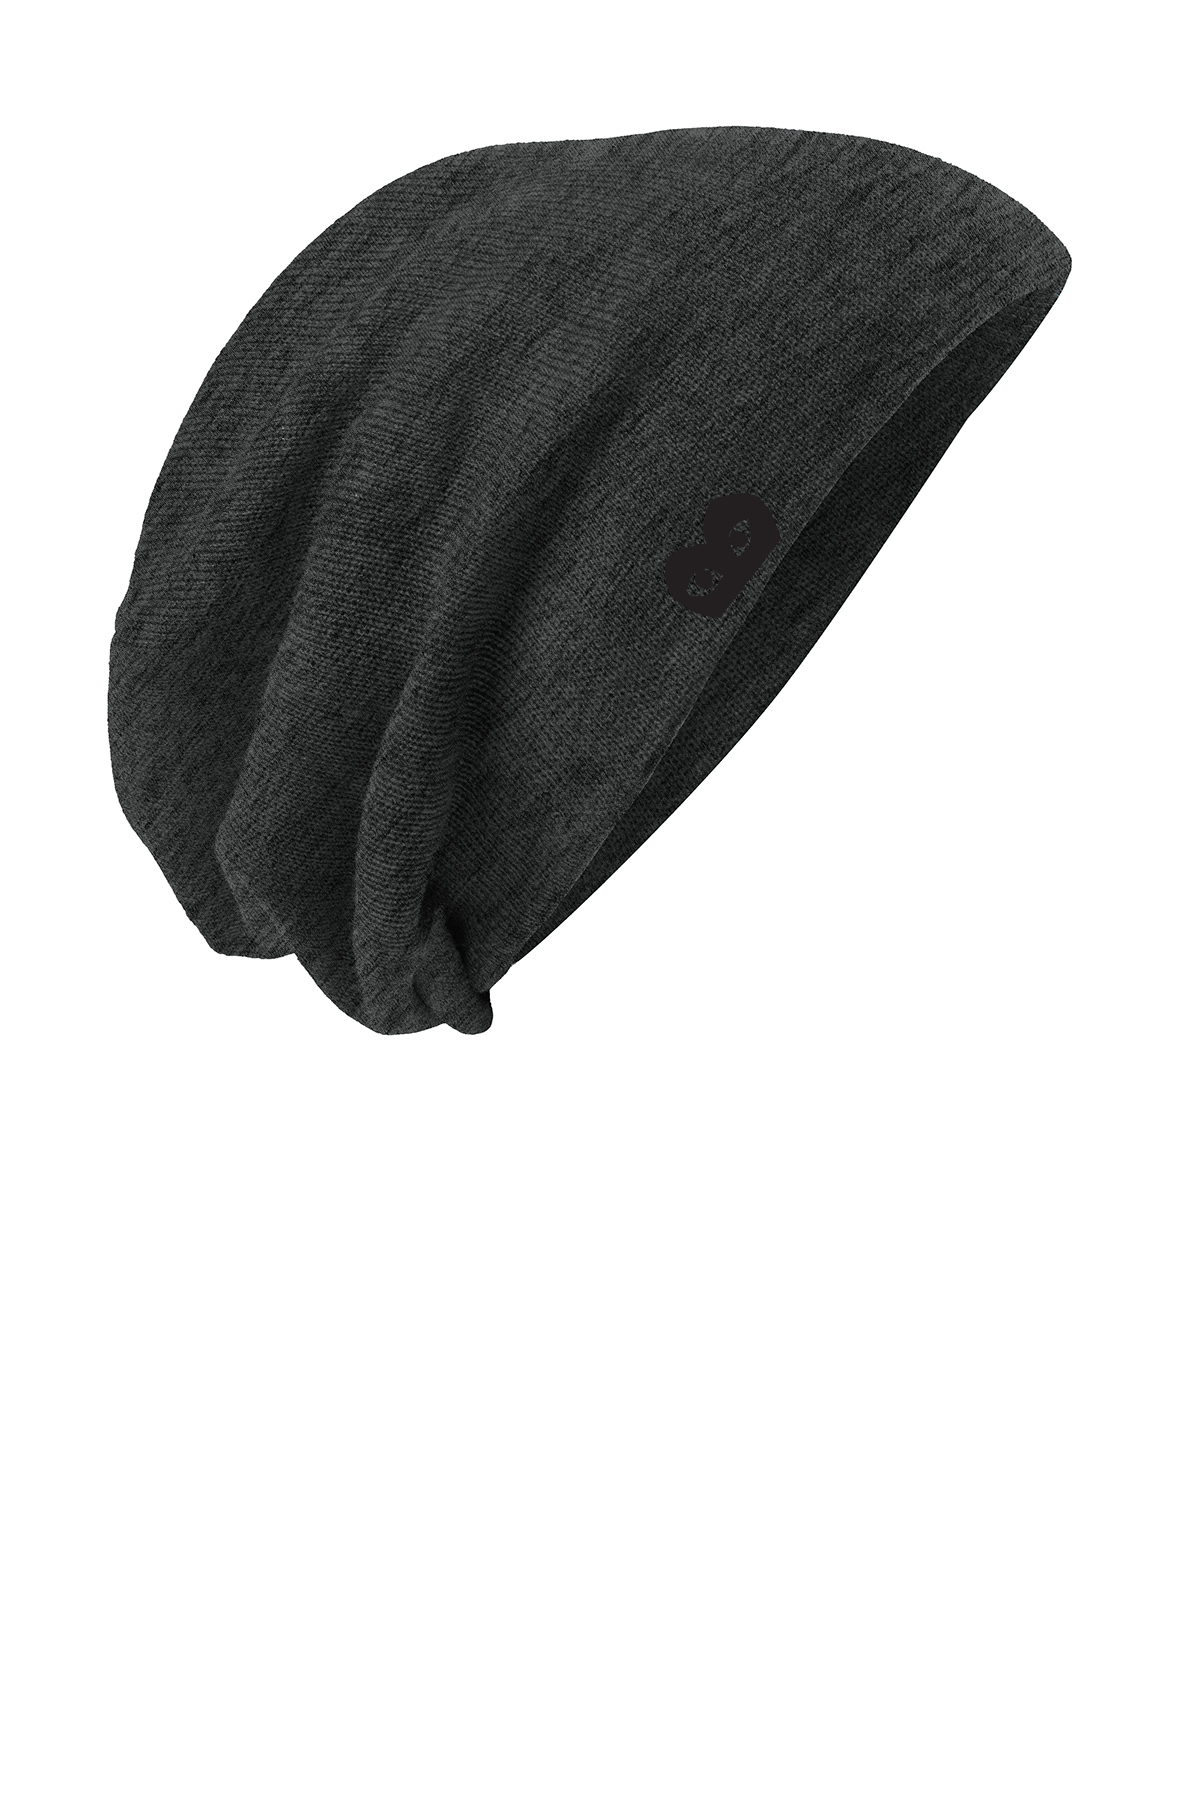 custom design of District DT618 Slouch Beanie